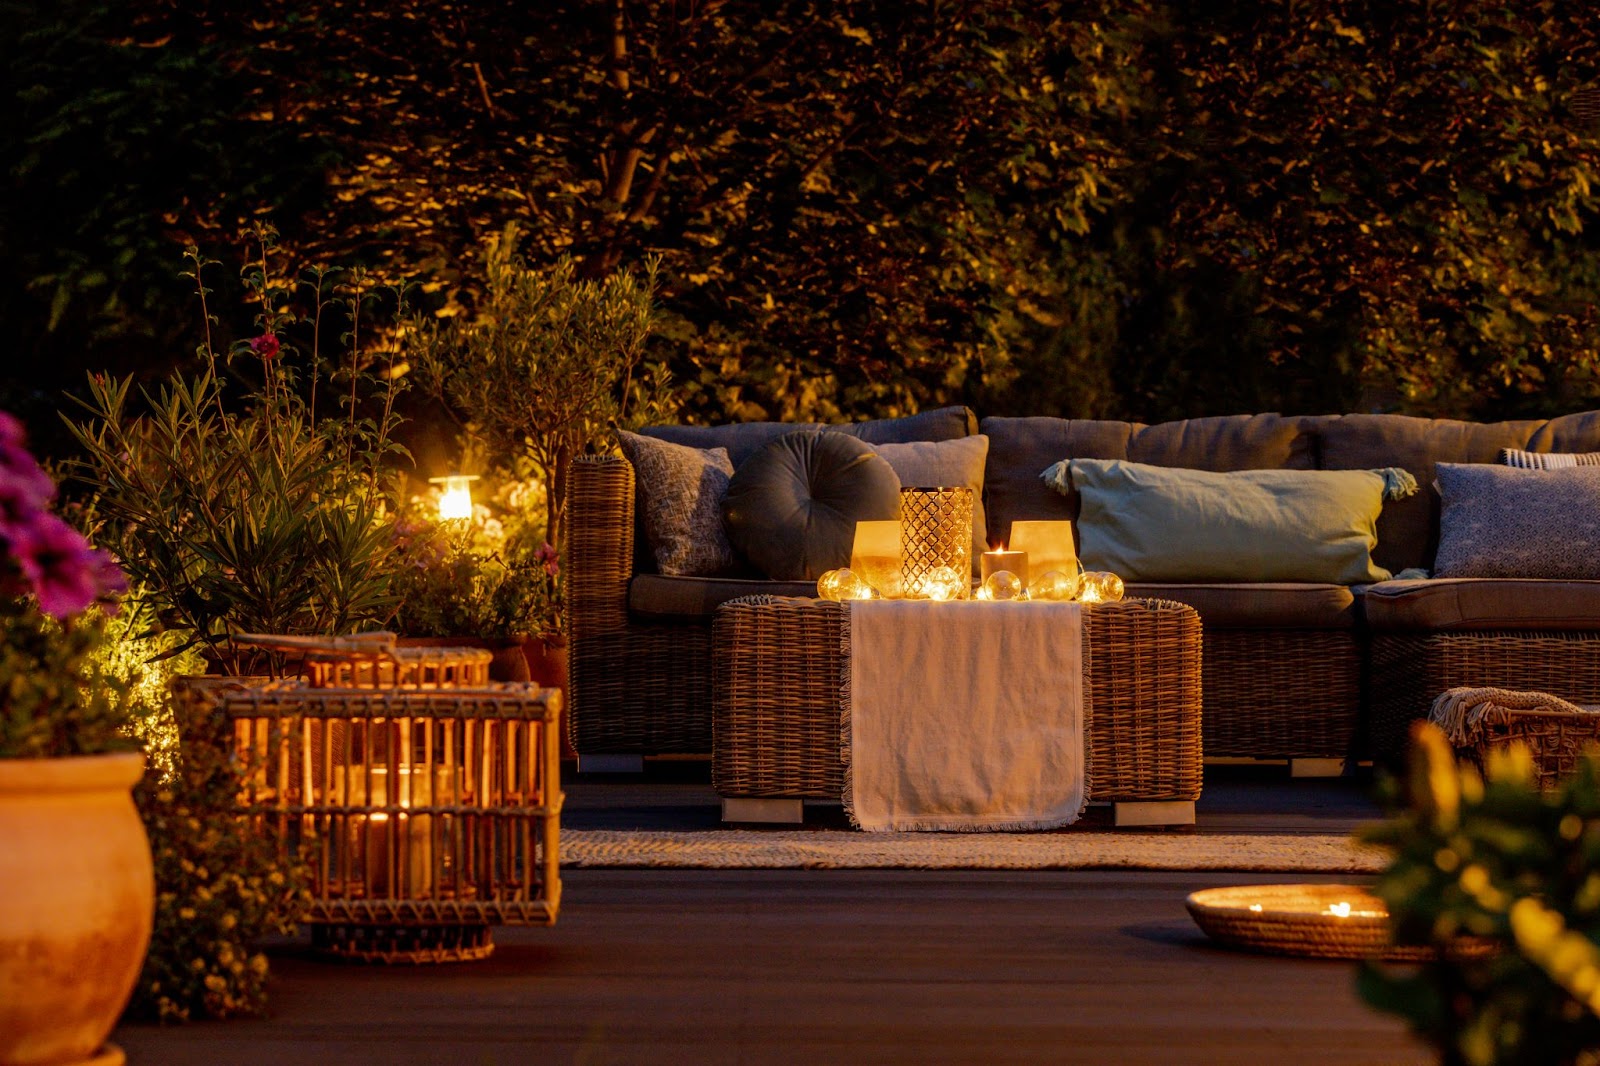 Design Inspiration: Creative Ideas for Your Patio Space